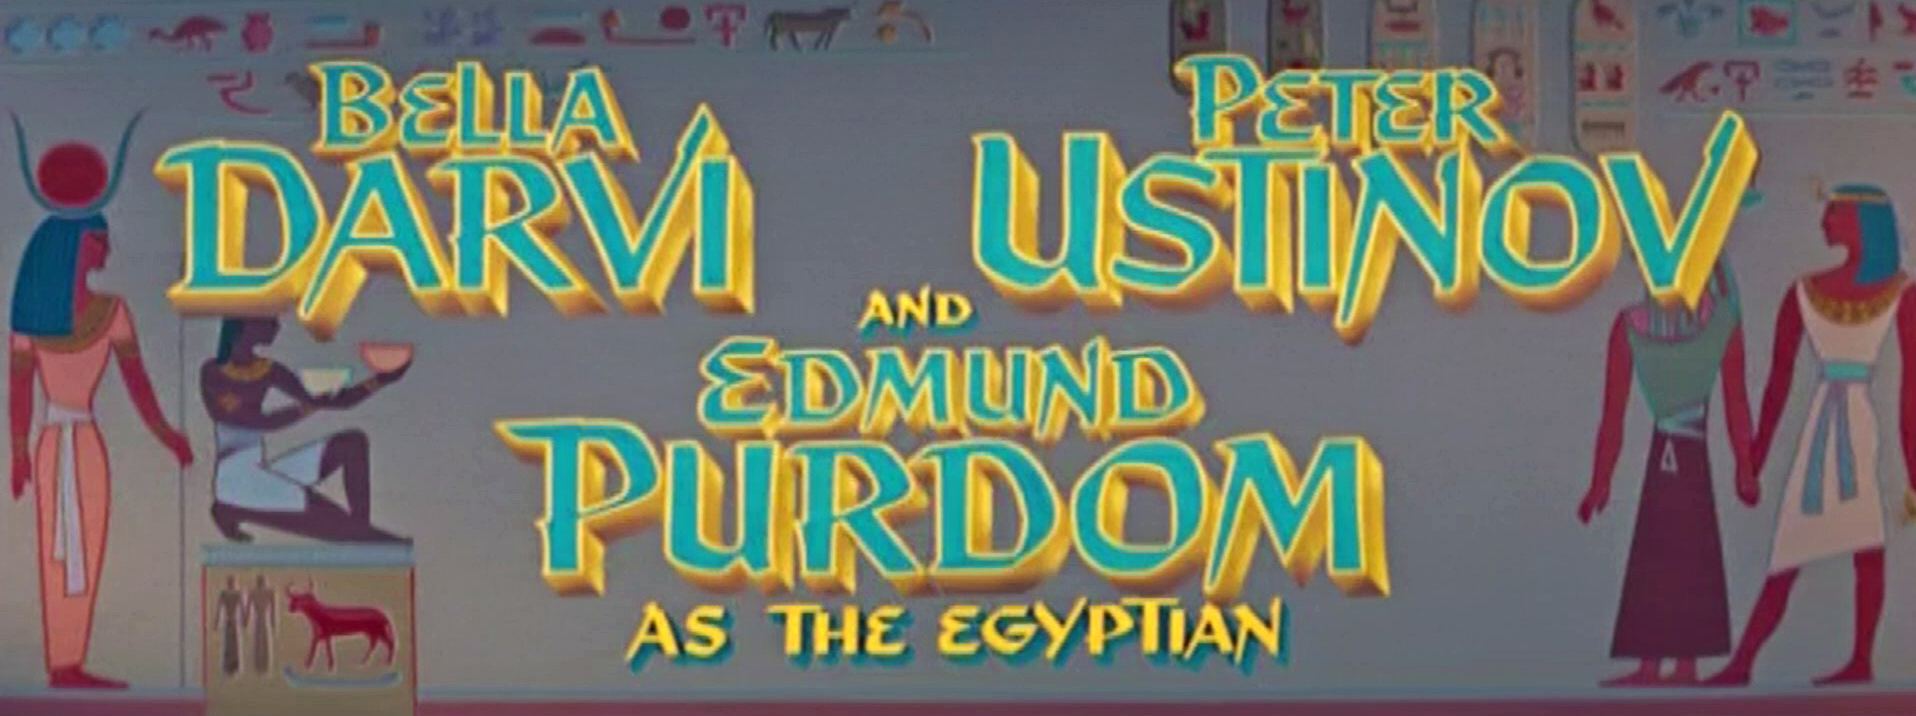 Main title from The Egyptian (1954) (5). Bella Darvi, Peter Ustinov and Edmund Purdom as the Egyptian